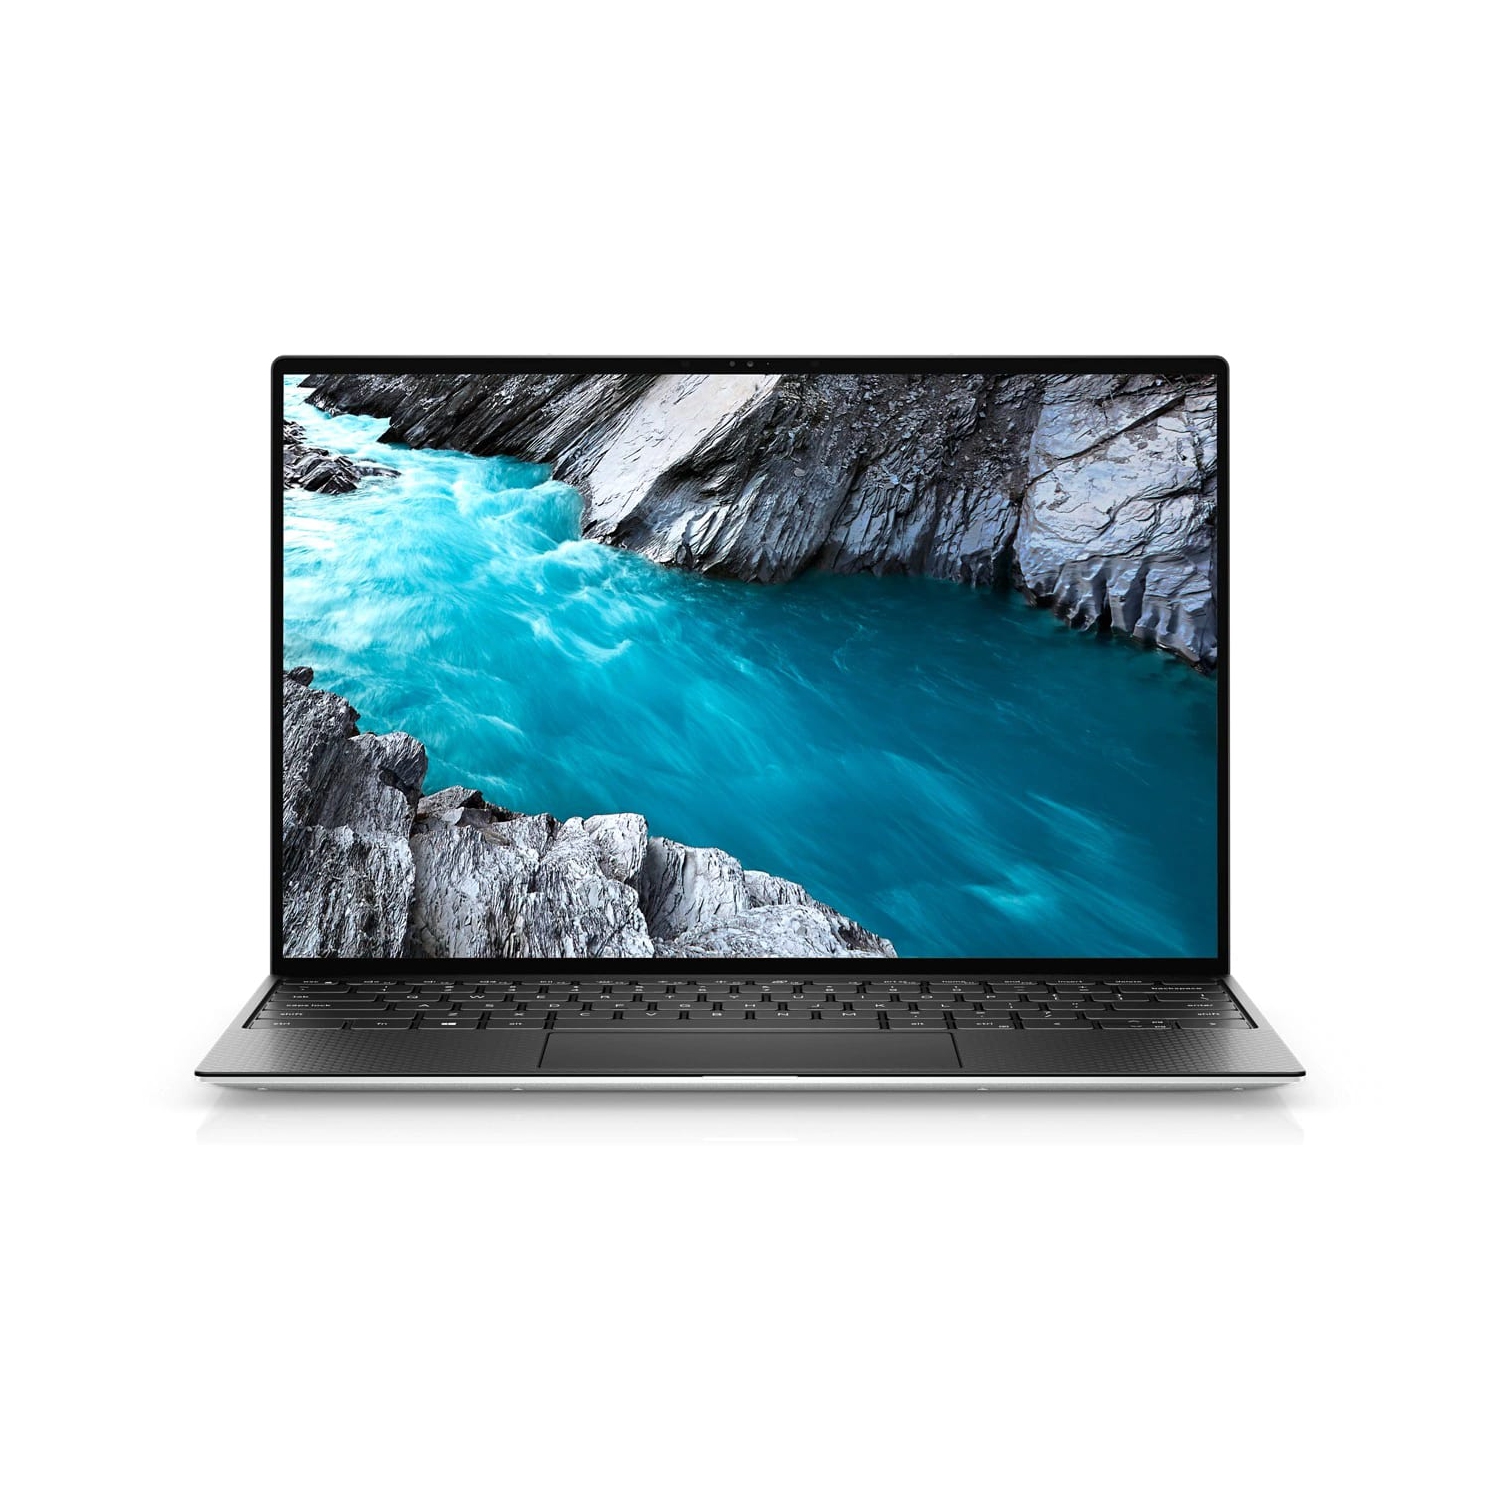 Refurbished (Excellent) - Dell XPS 13 9310 Laptop (2020) | 13.4" FHD+ Touch | Core i7 - 512GB SSD - 32GB RAM | 4 Cores @ 4.4 GHz - 11th Gen CPU Certified Refurbished